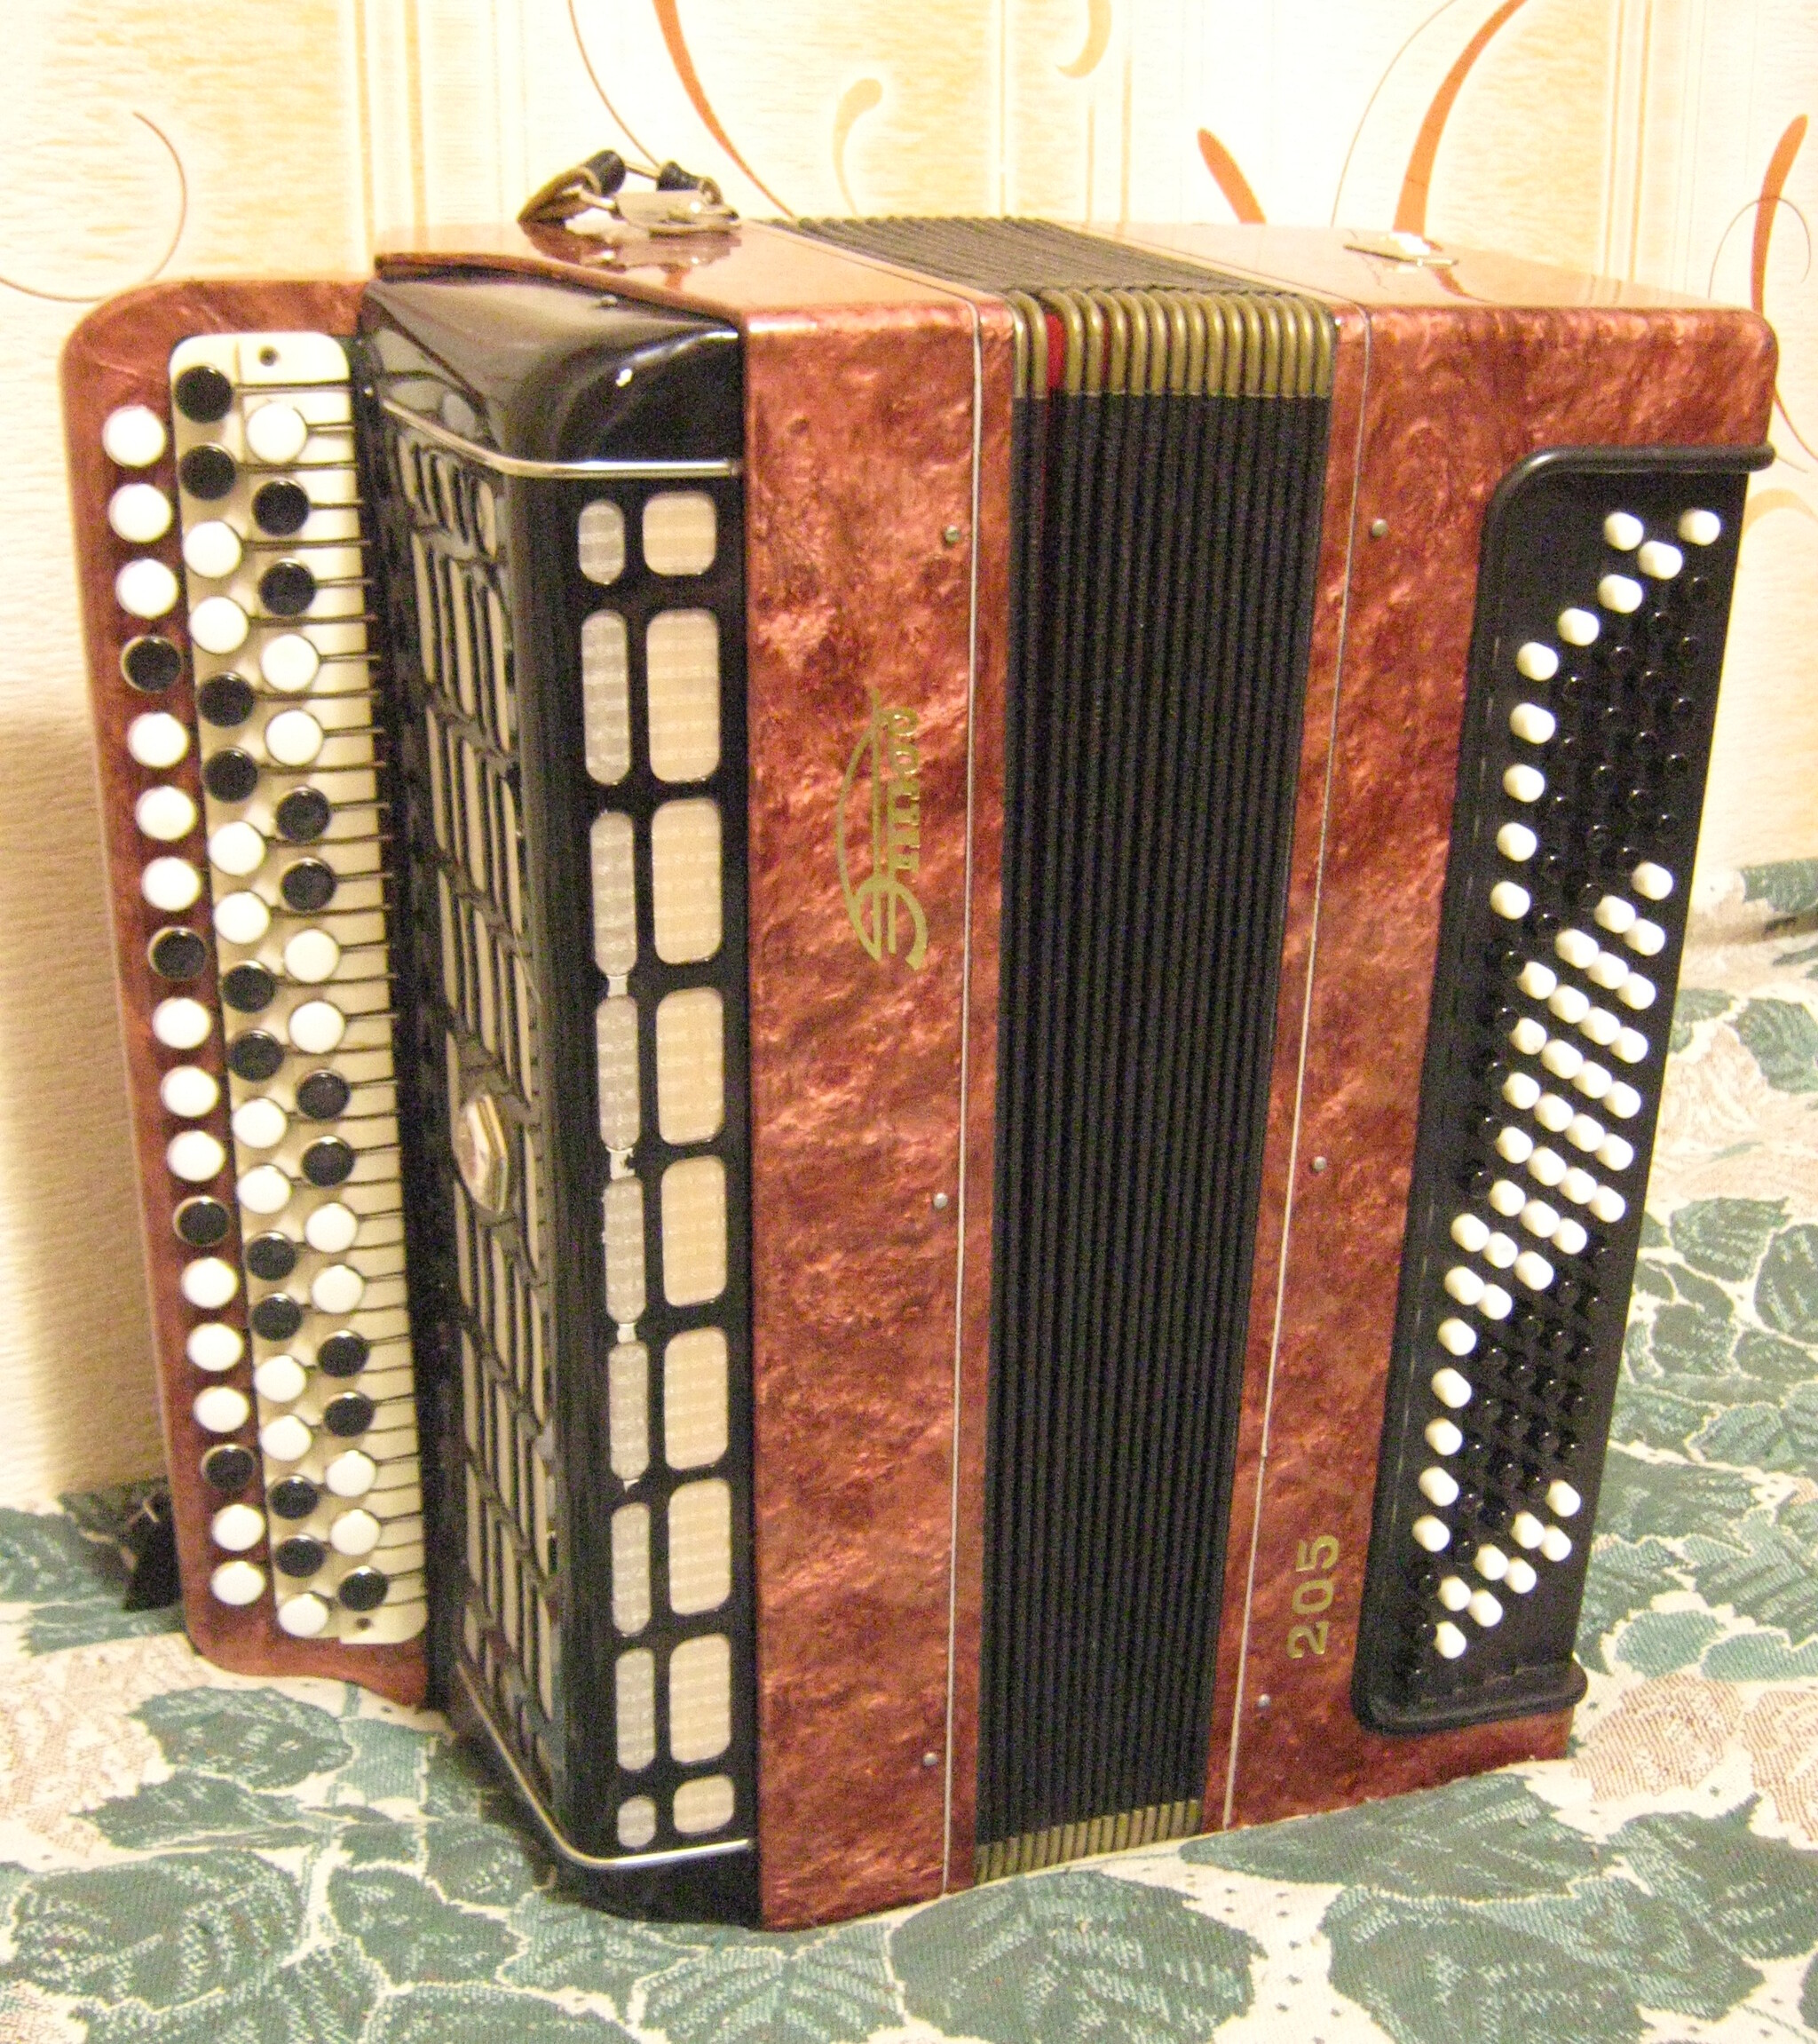 They say that if you post button accordions, you can gain pluses... - Humor, Memes, Sarcasm, Images, Wordplay